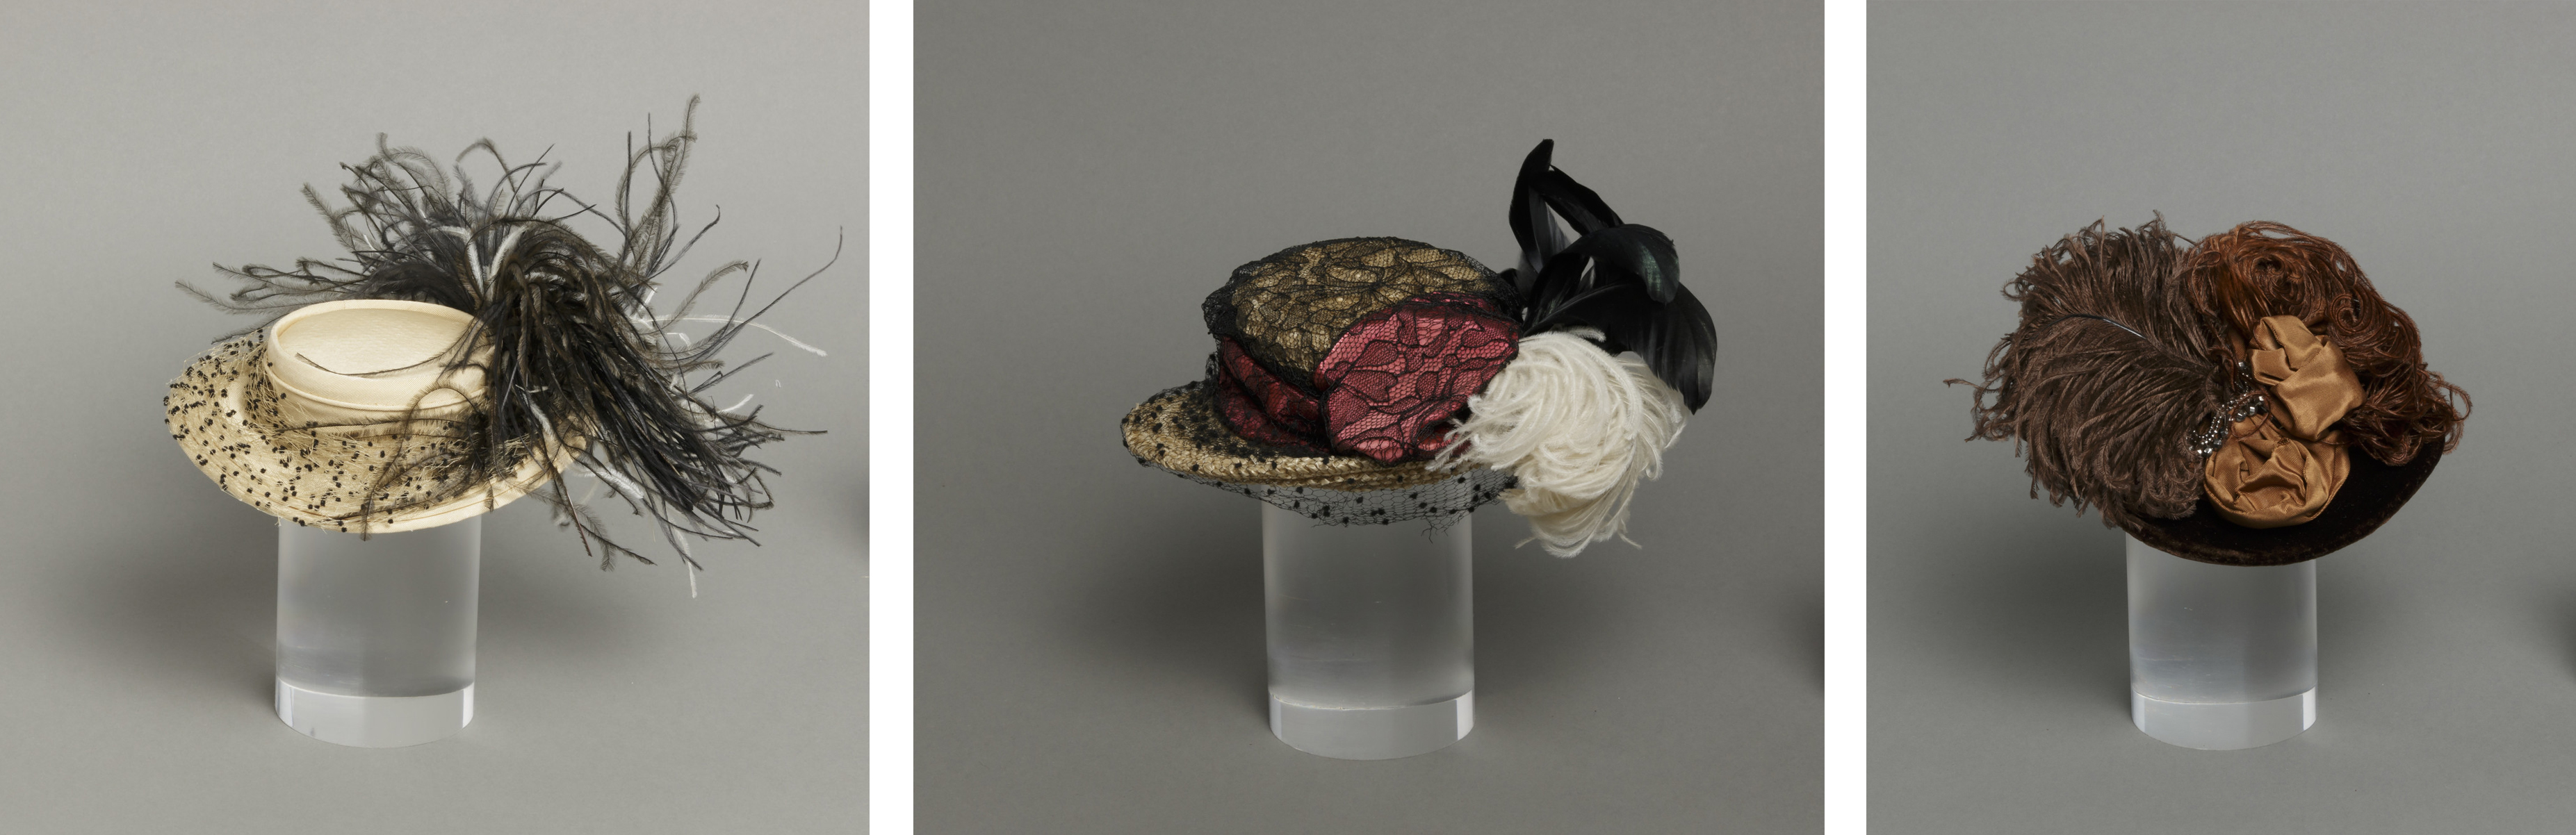 Three miniature hats decorated with feathers, lace, and flowers